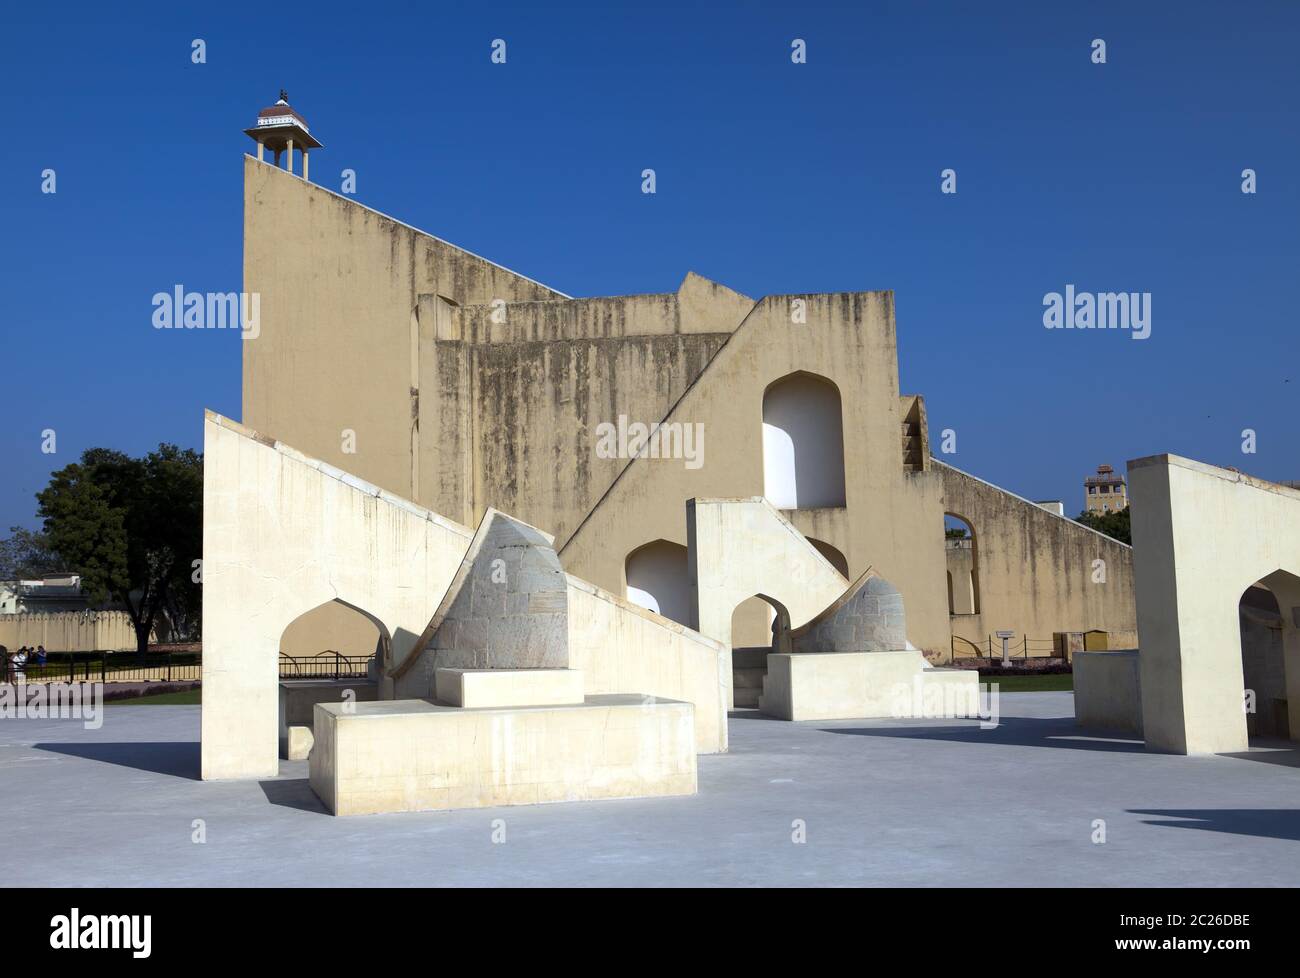 architectural astronomical instruments in Jantar Mantar observatory (completed in 1734), Jaipur, Ind Stock Photo